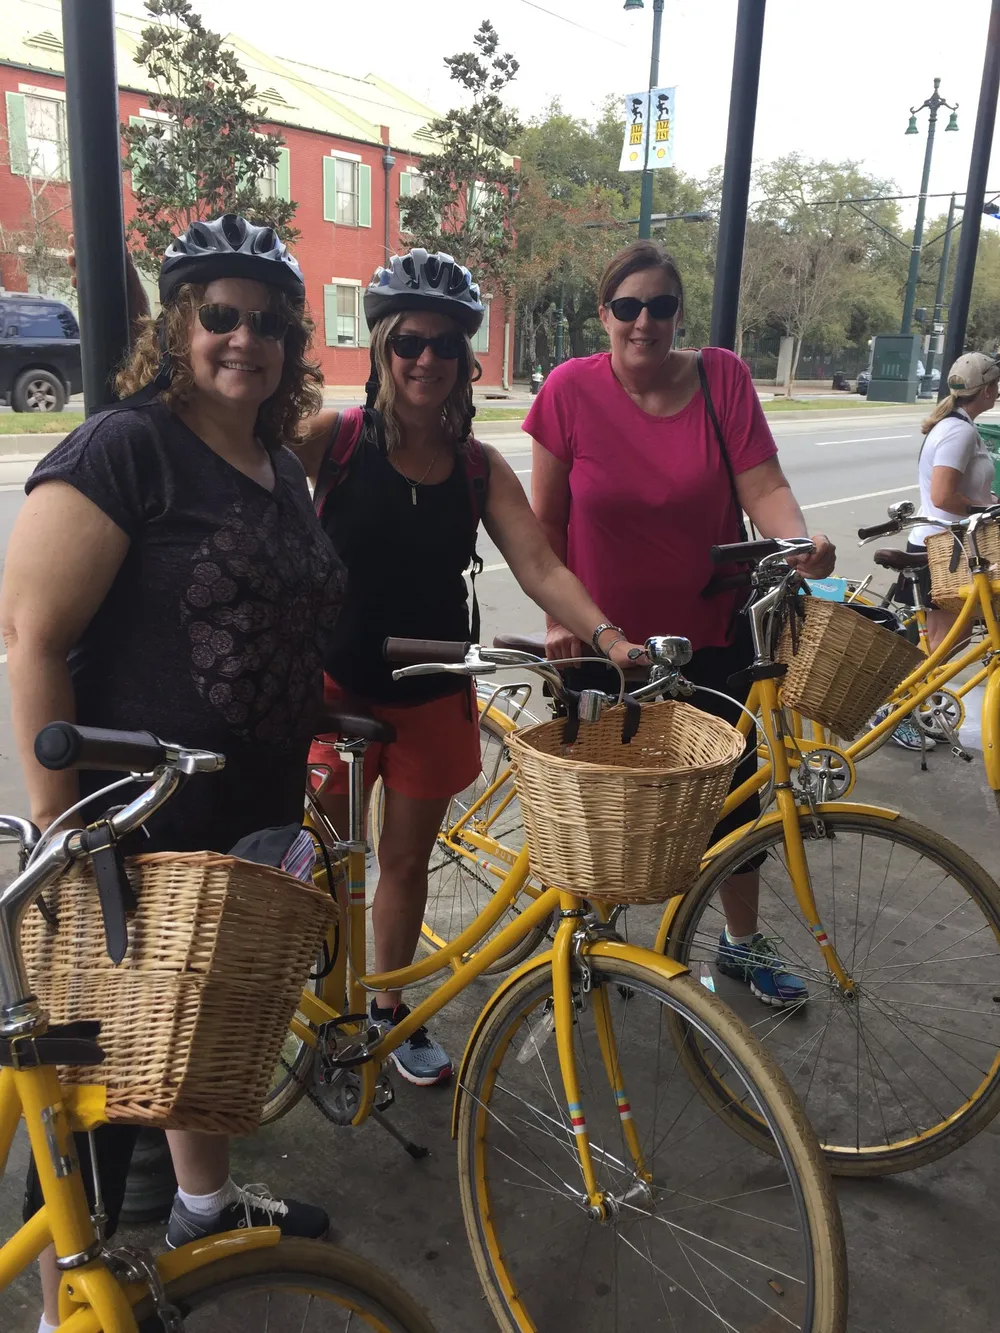 Three individuals wearing helmets stand smiling beside their yellow bicycles with wicker baskets apparently ready for a ride